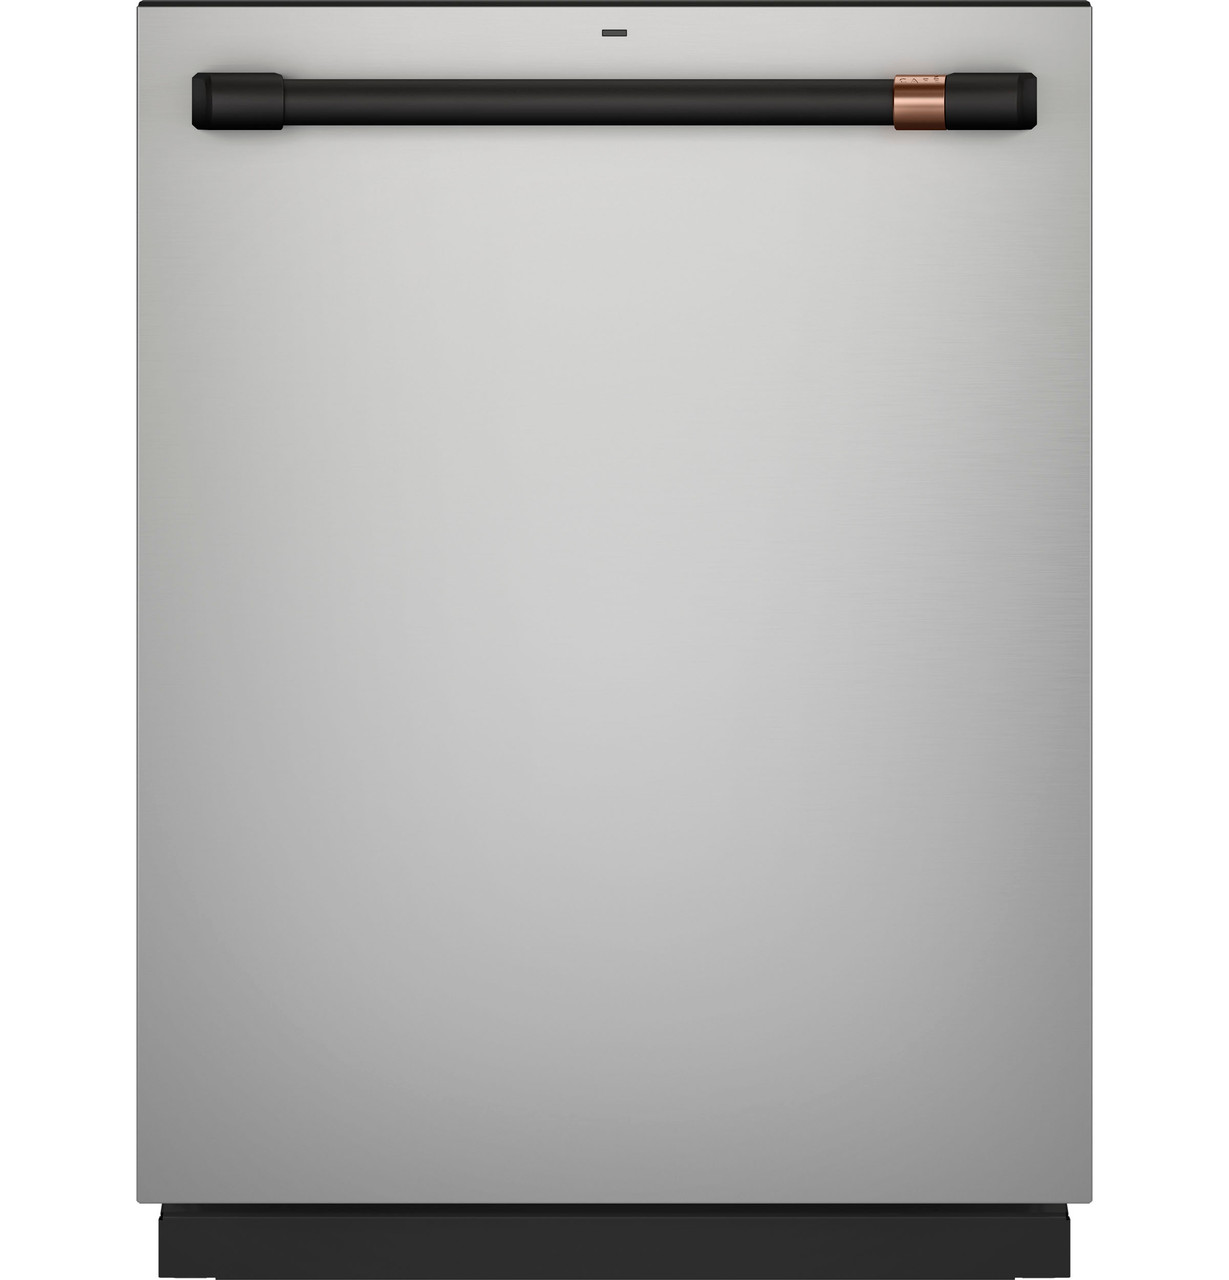 Café™ ENERGY STAR® Stainless Steel Interior Dishwasher with